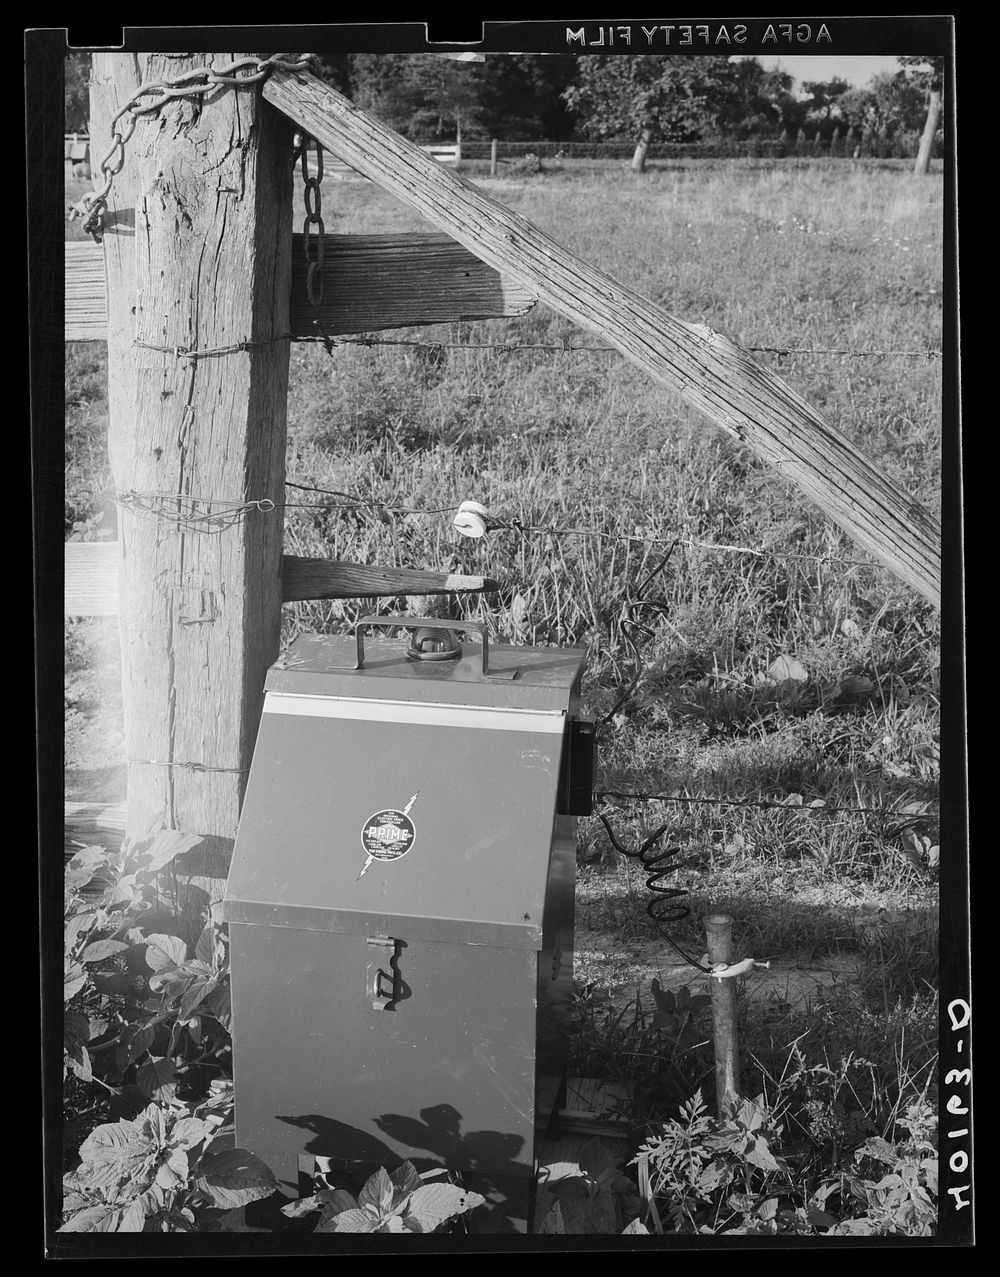 Lititz (vicinity), Lancaster County, Pennsylvania. Electric fence controller on the C.F. Minnich farm. Sourced from the…